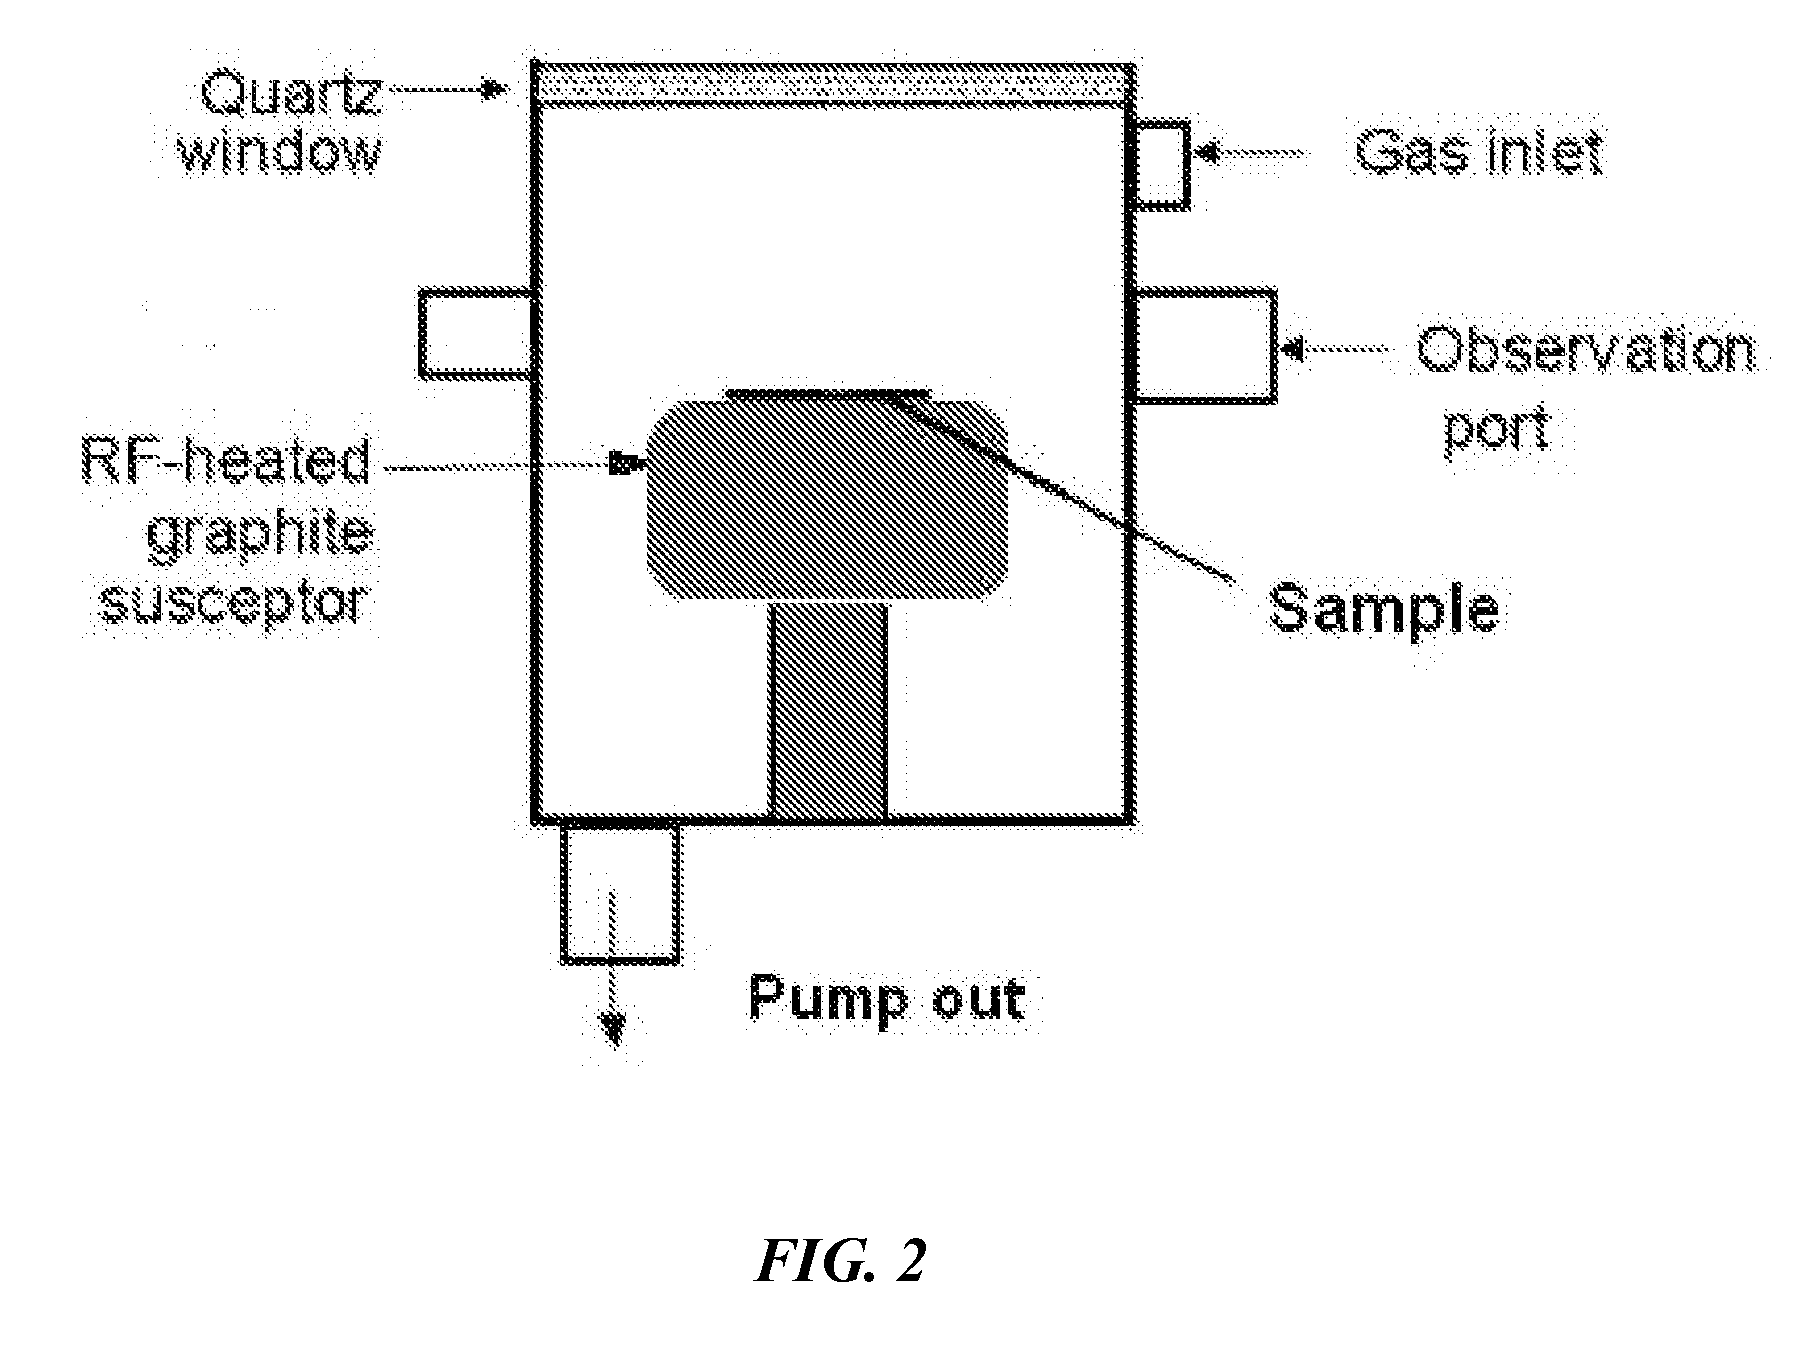 Method to enhance osteoblast functionality and measure electrochemical properties for a medical implant